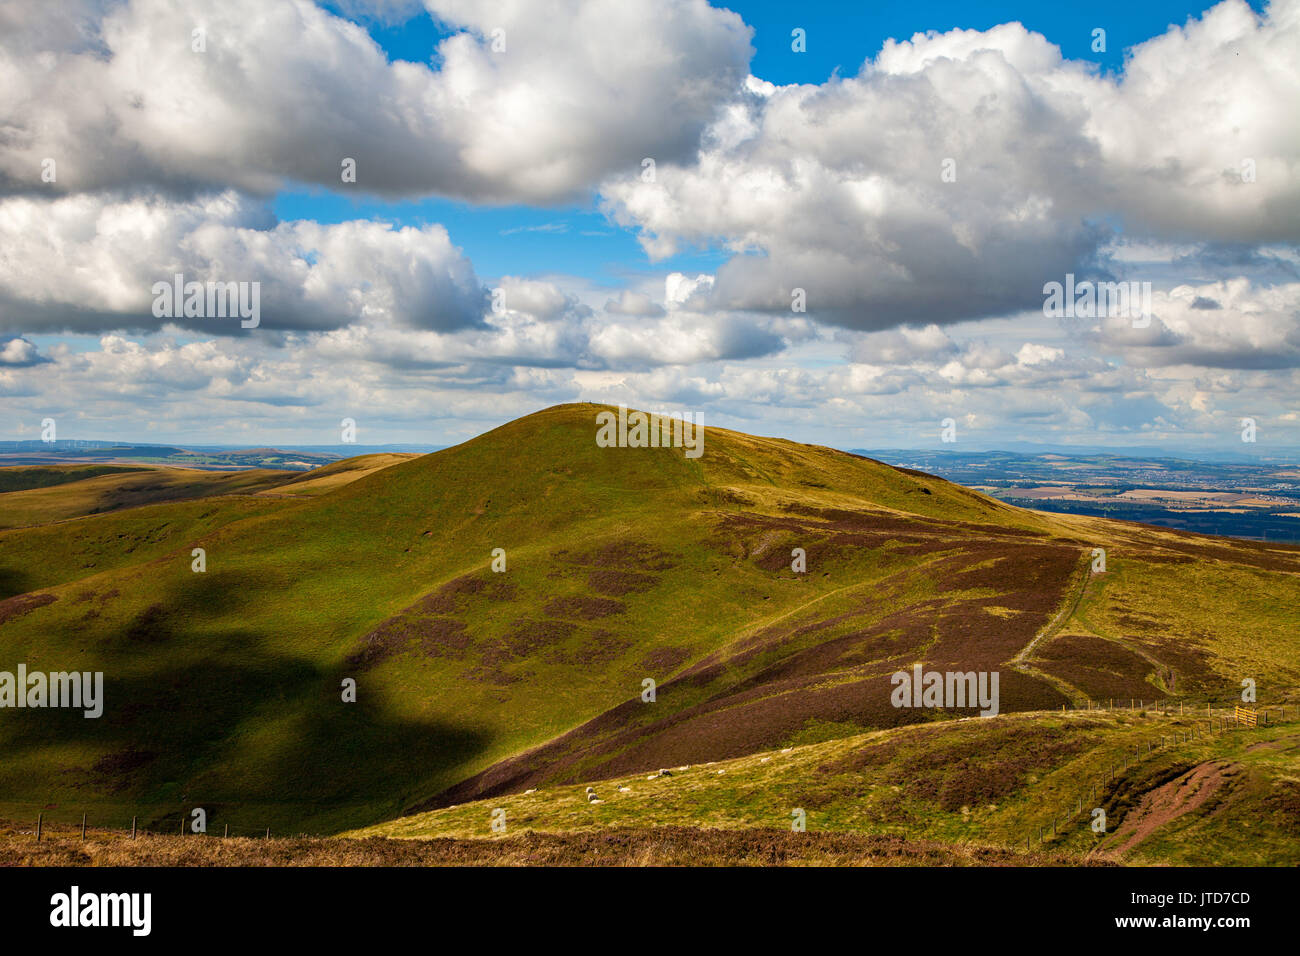 View across the Pentland Hills with sheep in the foreground near Edinburgh in Scotland Stock Photo